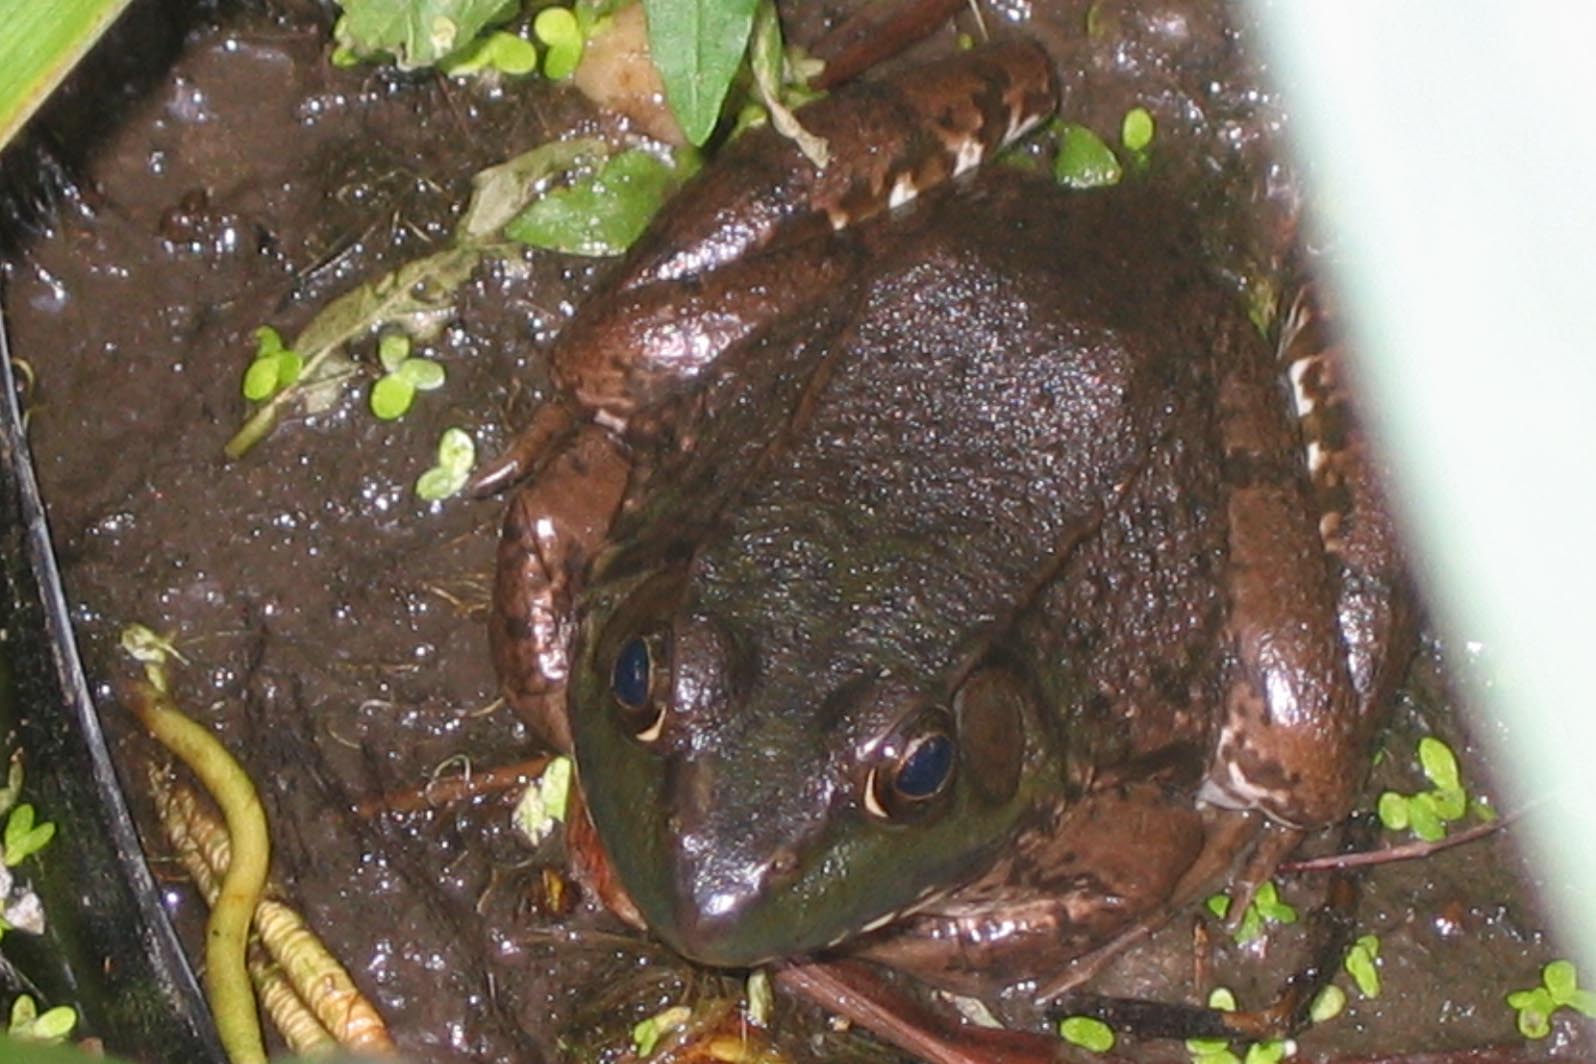 frog with dark body sitting in dirt with green leaves